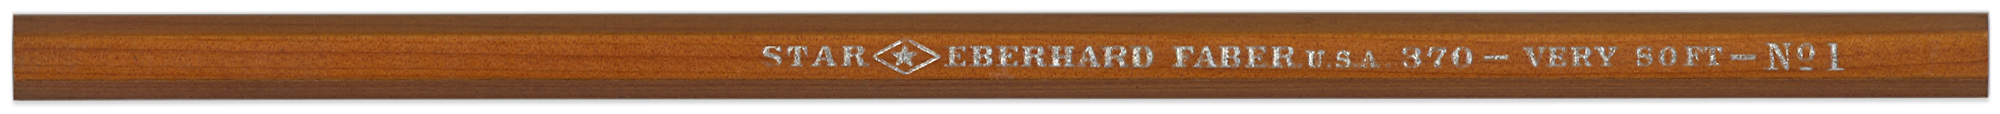 Star 370 No.1 by Eberhard Faber | Brand Name Pencils